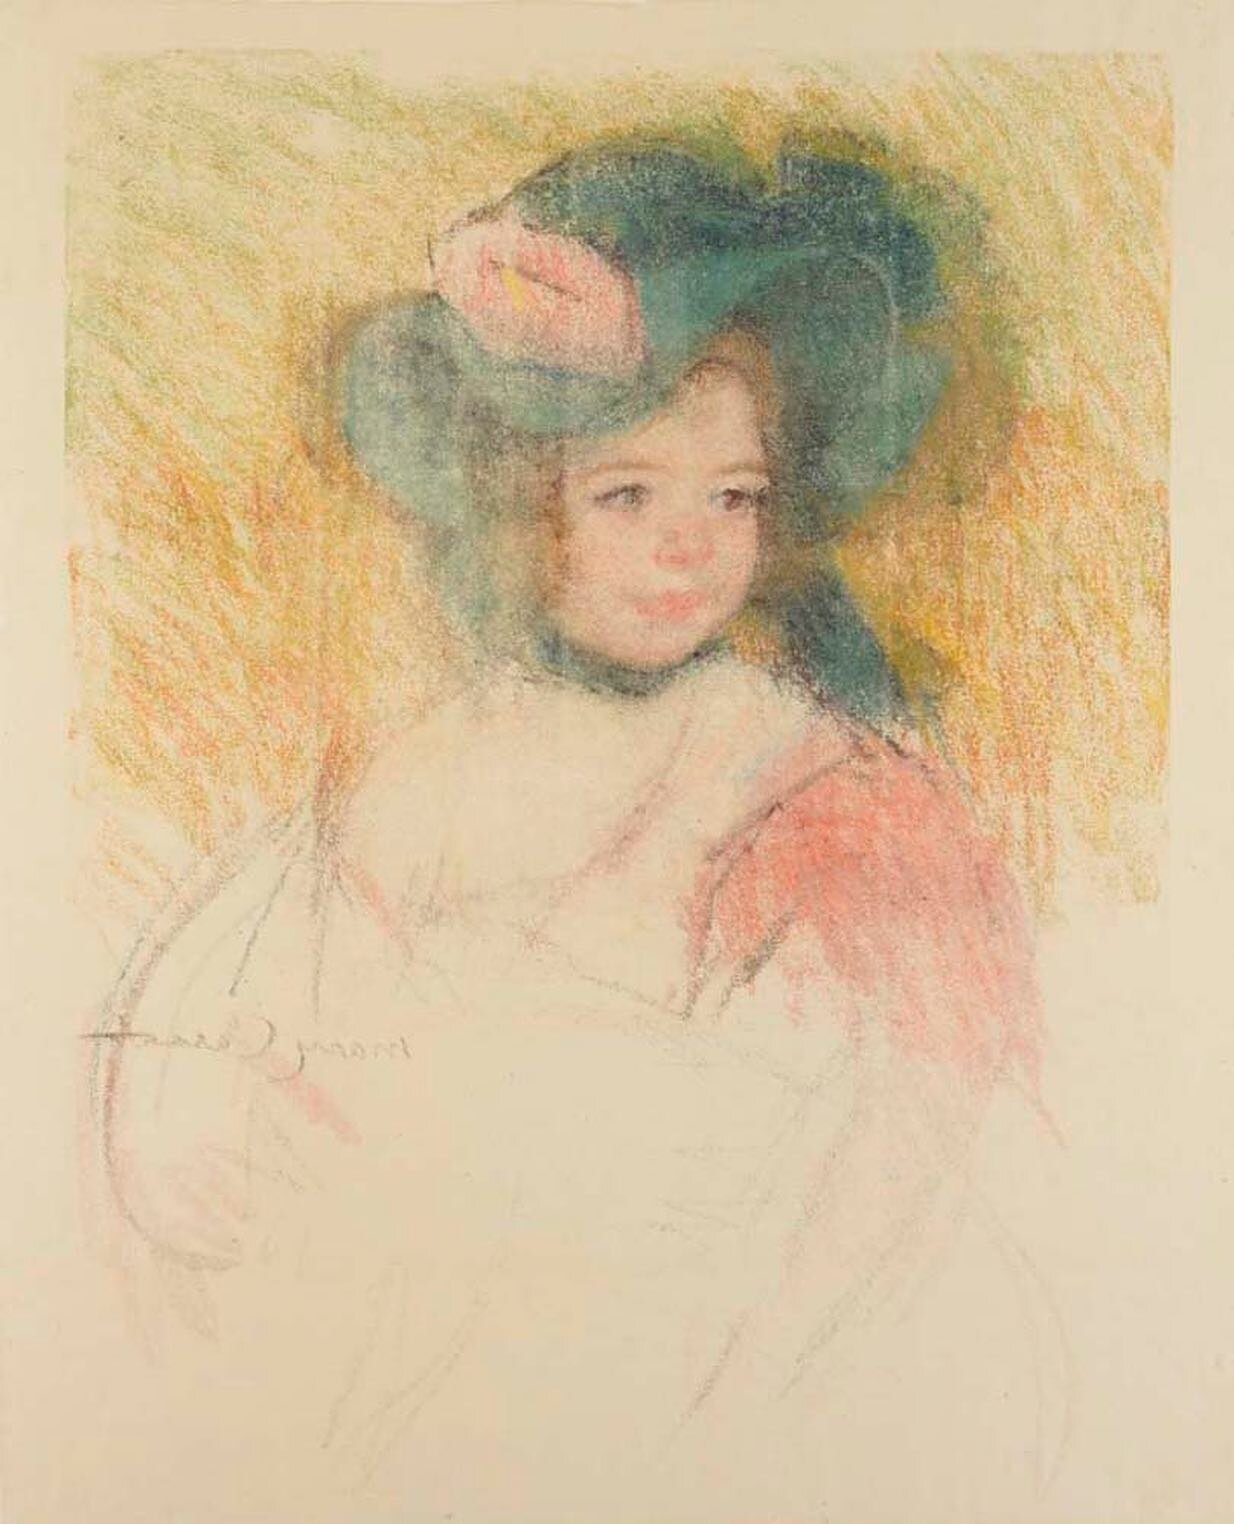 The Counterproofs of Mary Cassatt⁠⁠ 👧👒
⁠⁠
Mary Cassatt created her counterproofs by pressing a damp sheet of paper on the face of an existing pastel. The process transferred a mirror image of the original that looked more faded and softened&mdash;m